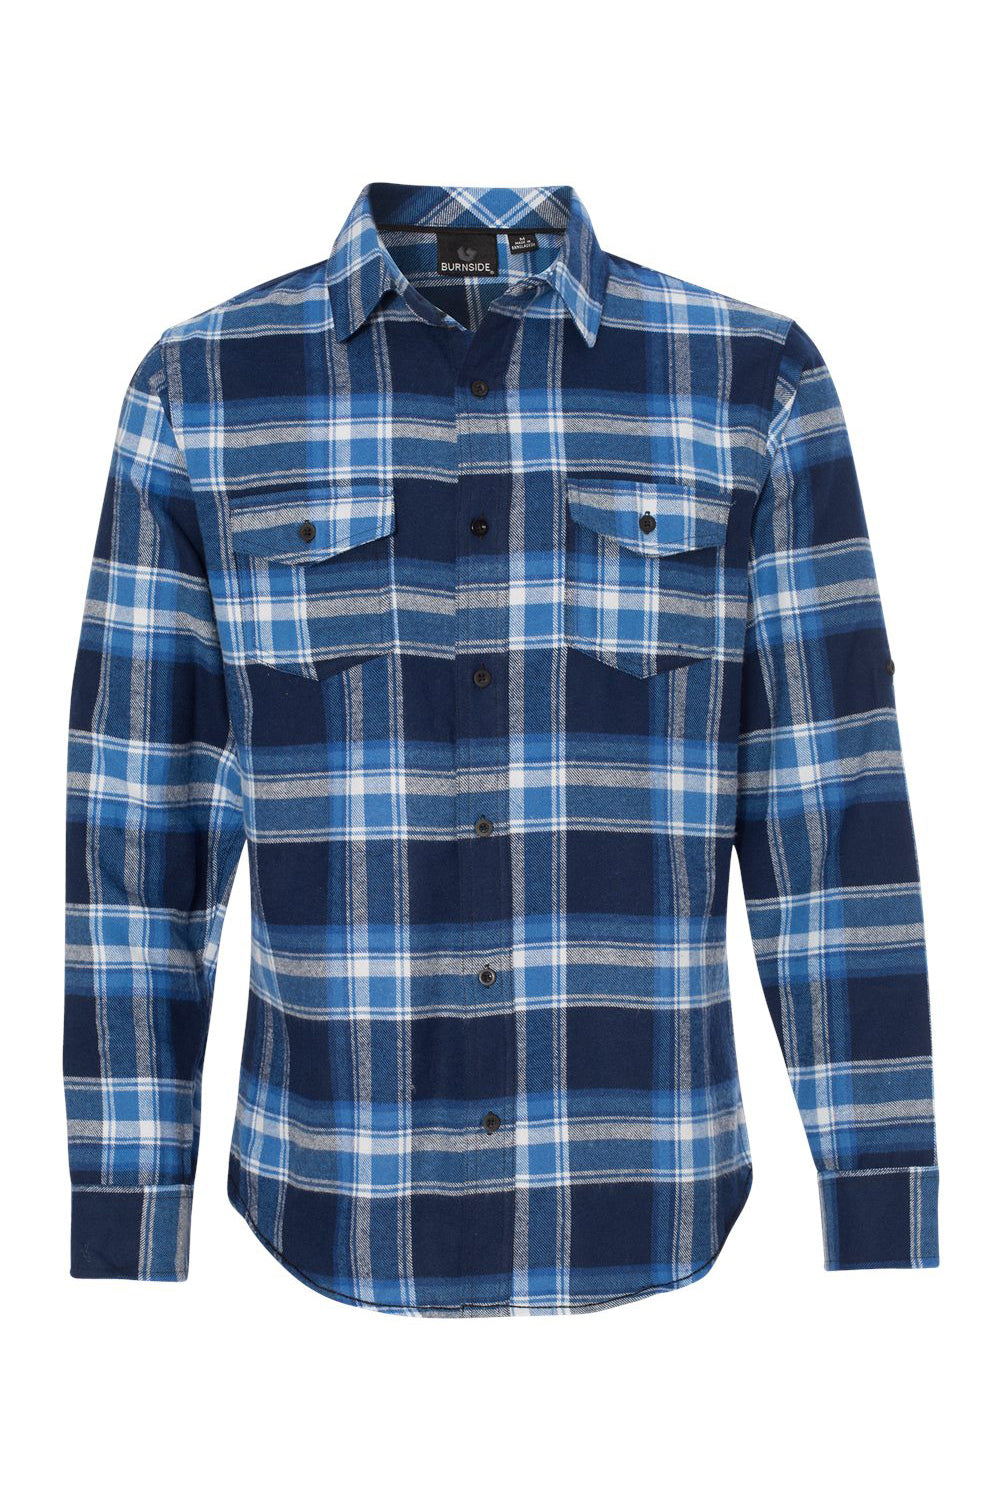 Burnside B8210/8210 Mens Flannel Long Sleeve Button Down Shirt w/ Double Pockets Blue/White Flat Front